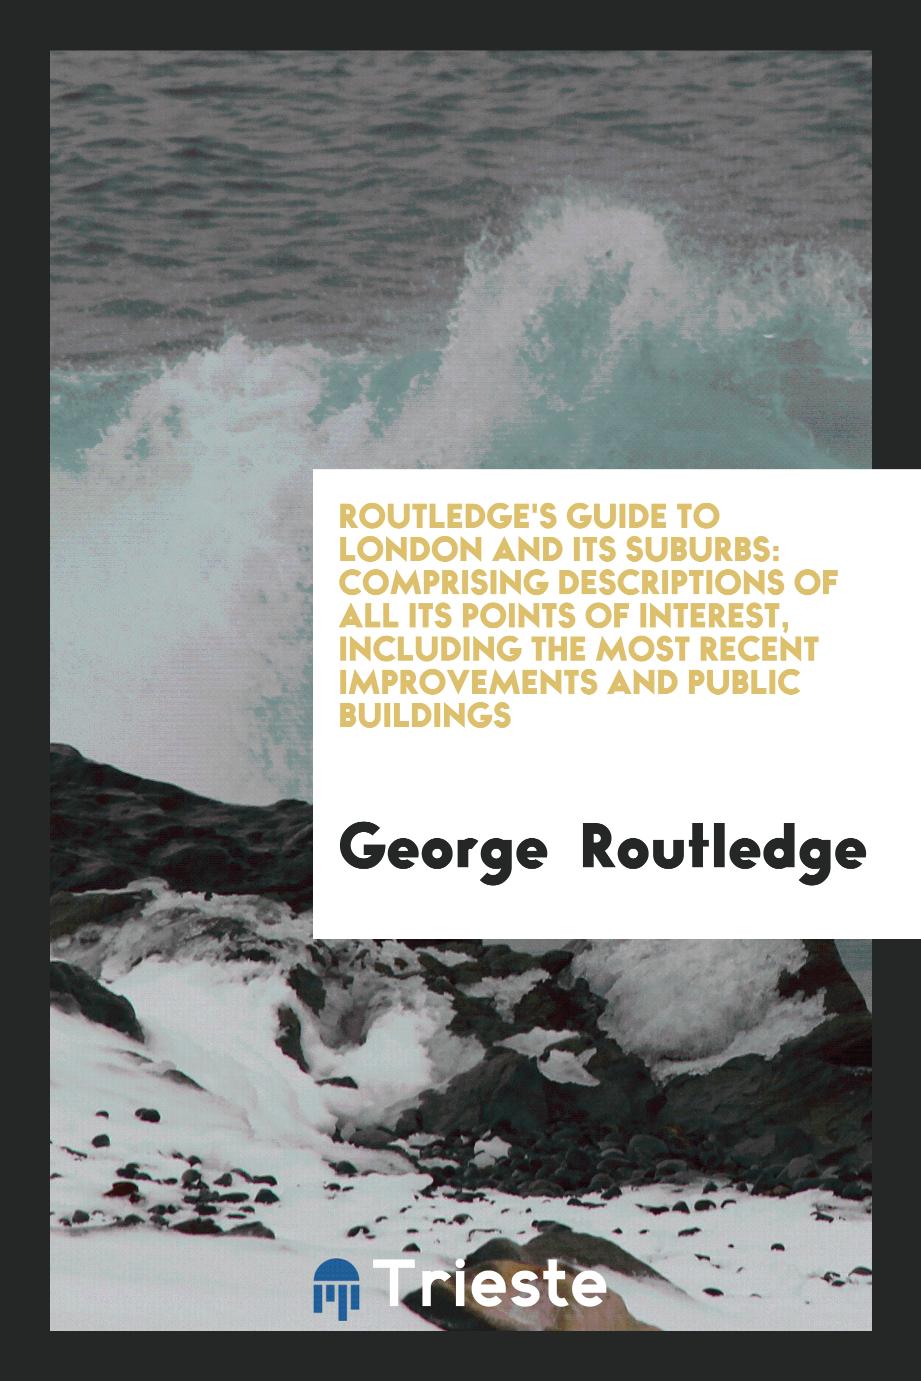 Routledge's Guide to London and Its Suburbs: Comprising Descriptions of All Its Points of Interest, Including the Most Recent Improvements and Public Buildings